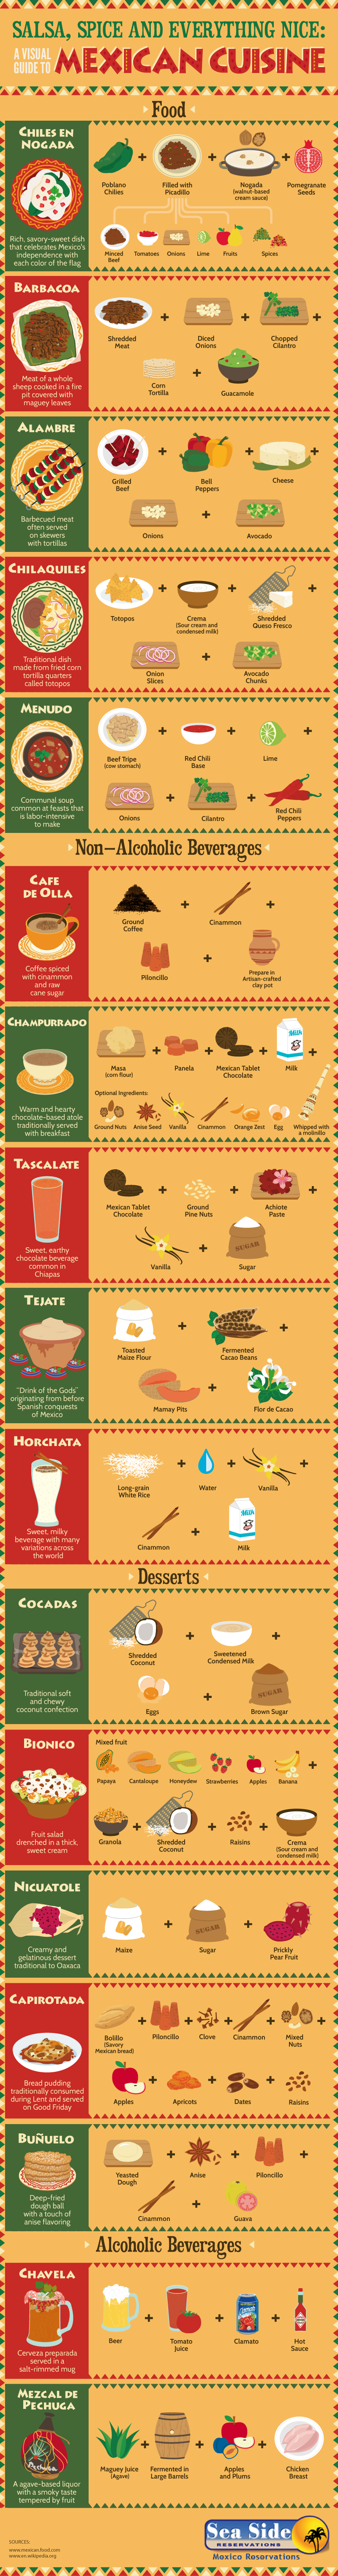 Salsa, Spice And Everything Nice: A Visual Guide to Mexican Cuisine